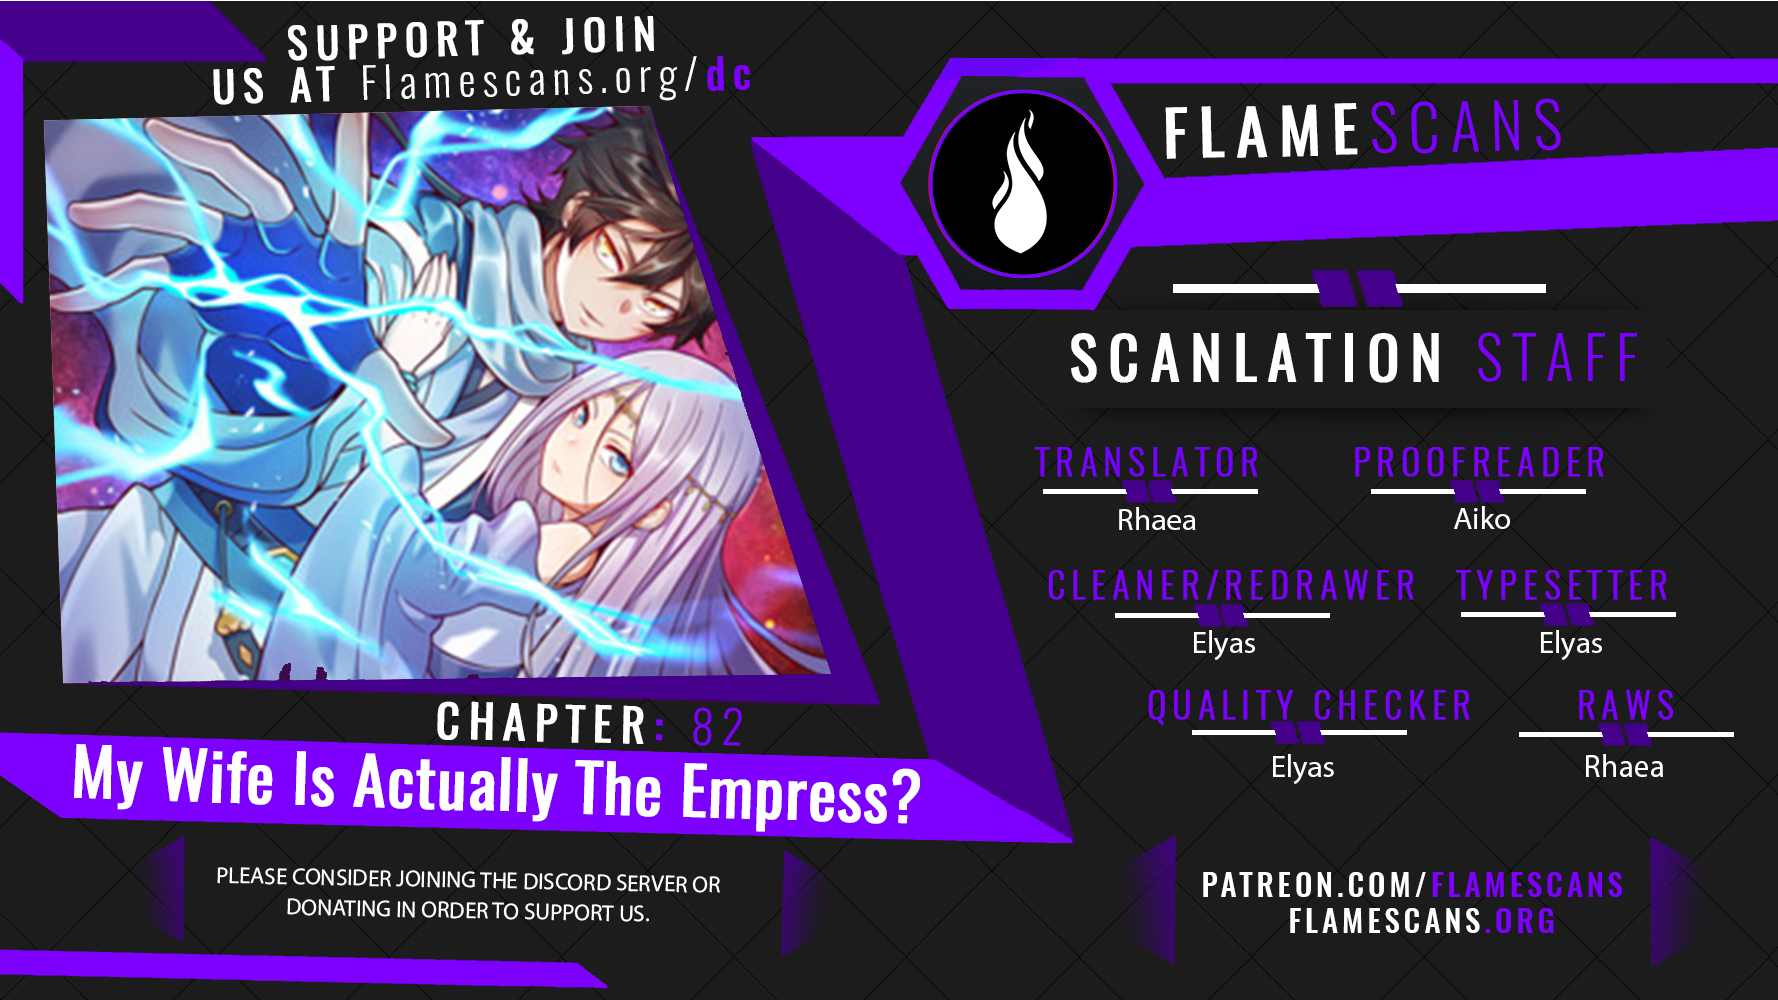 My Wife Is Actually The Empress? - Chapter 16058 - Image 1